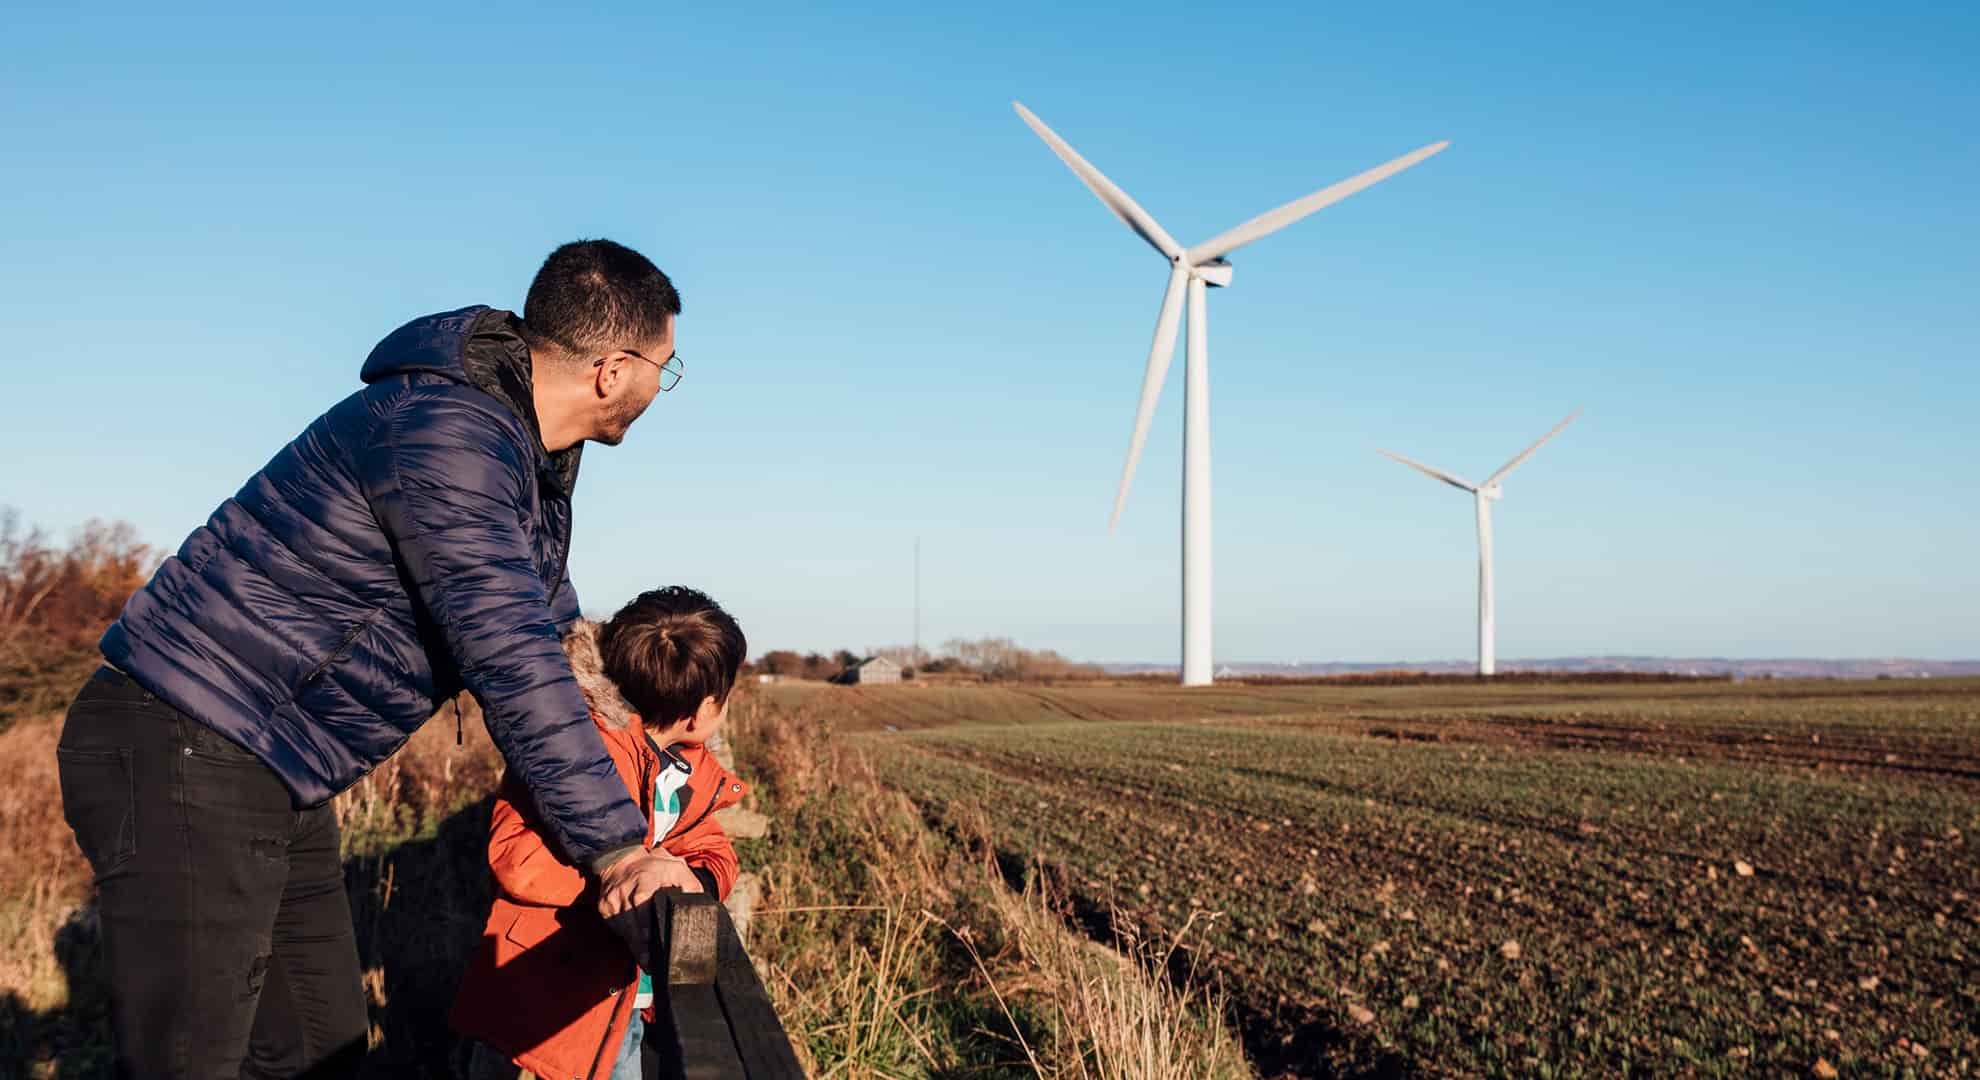 A father and son leaning against a fence in a field together, they are looking at the wind turbines.